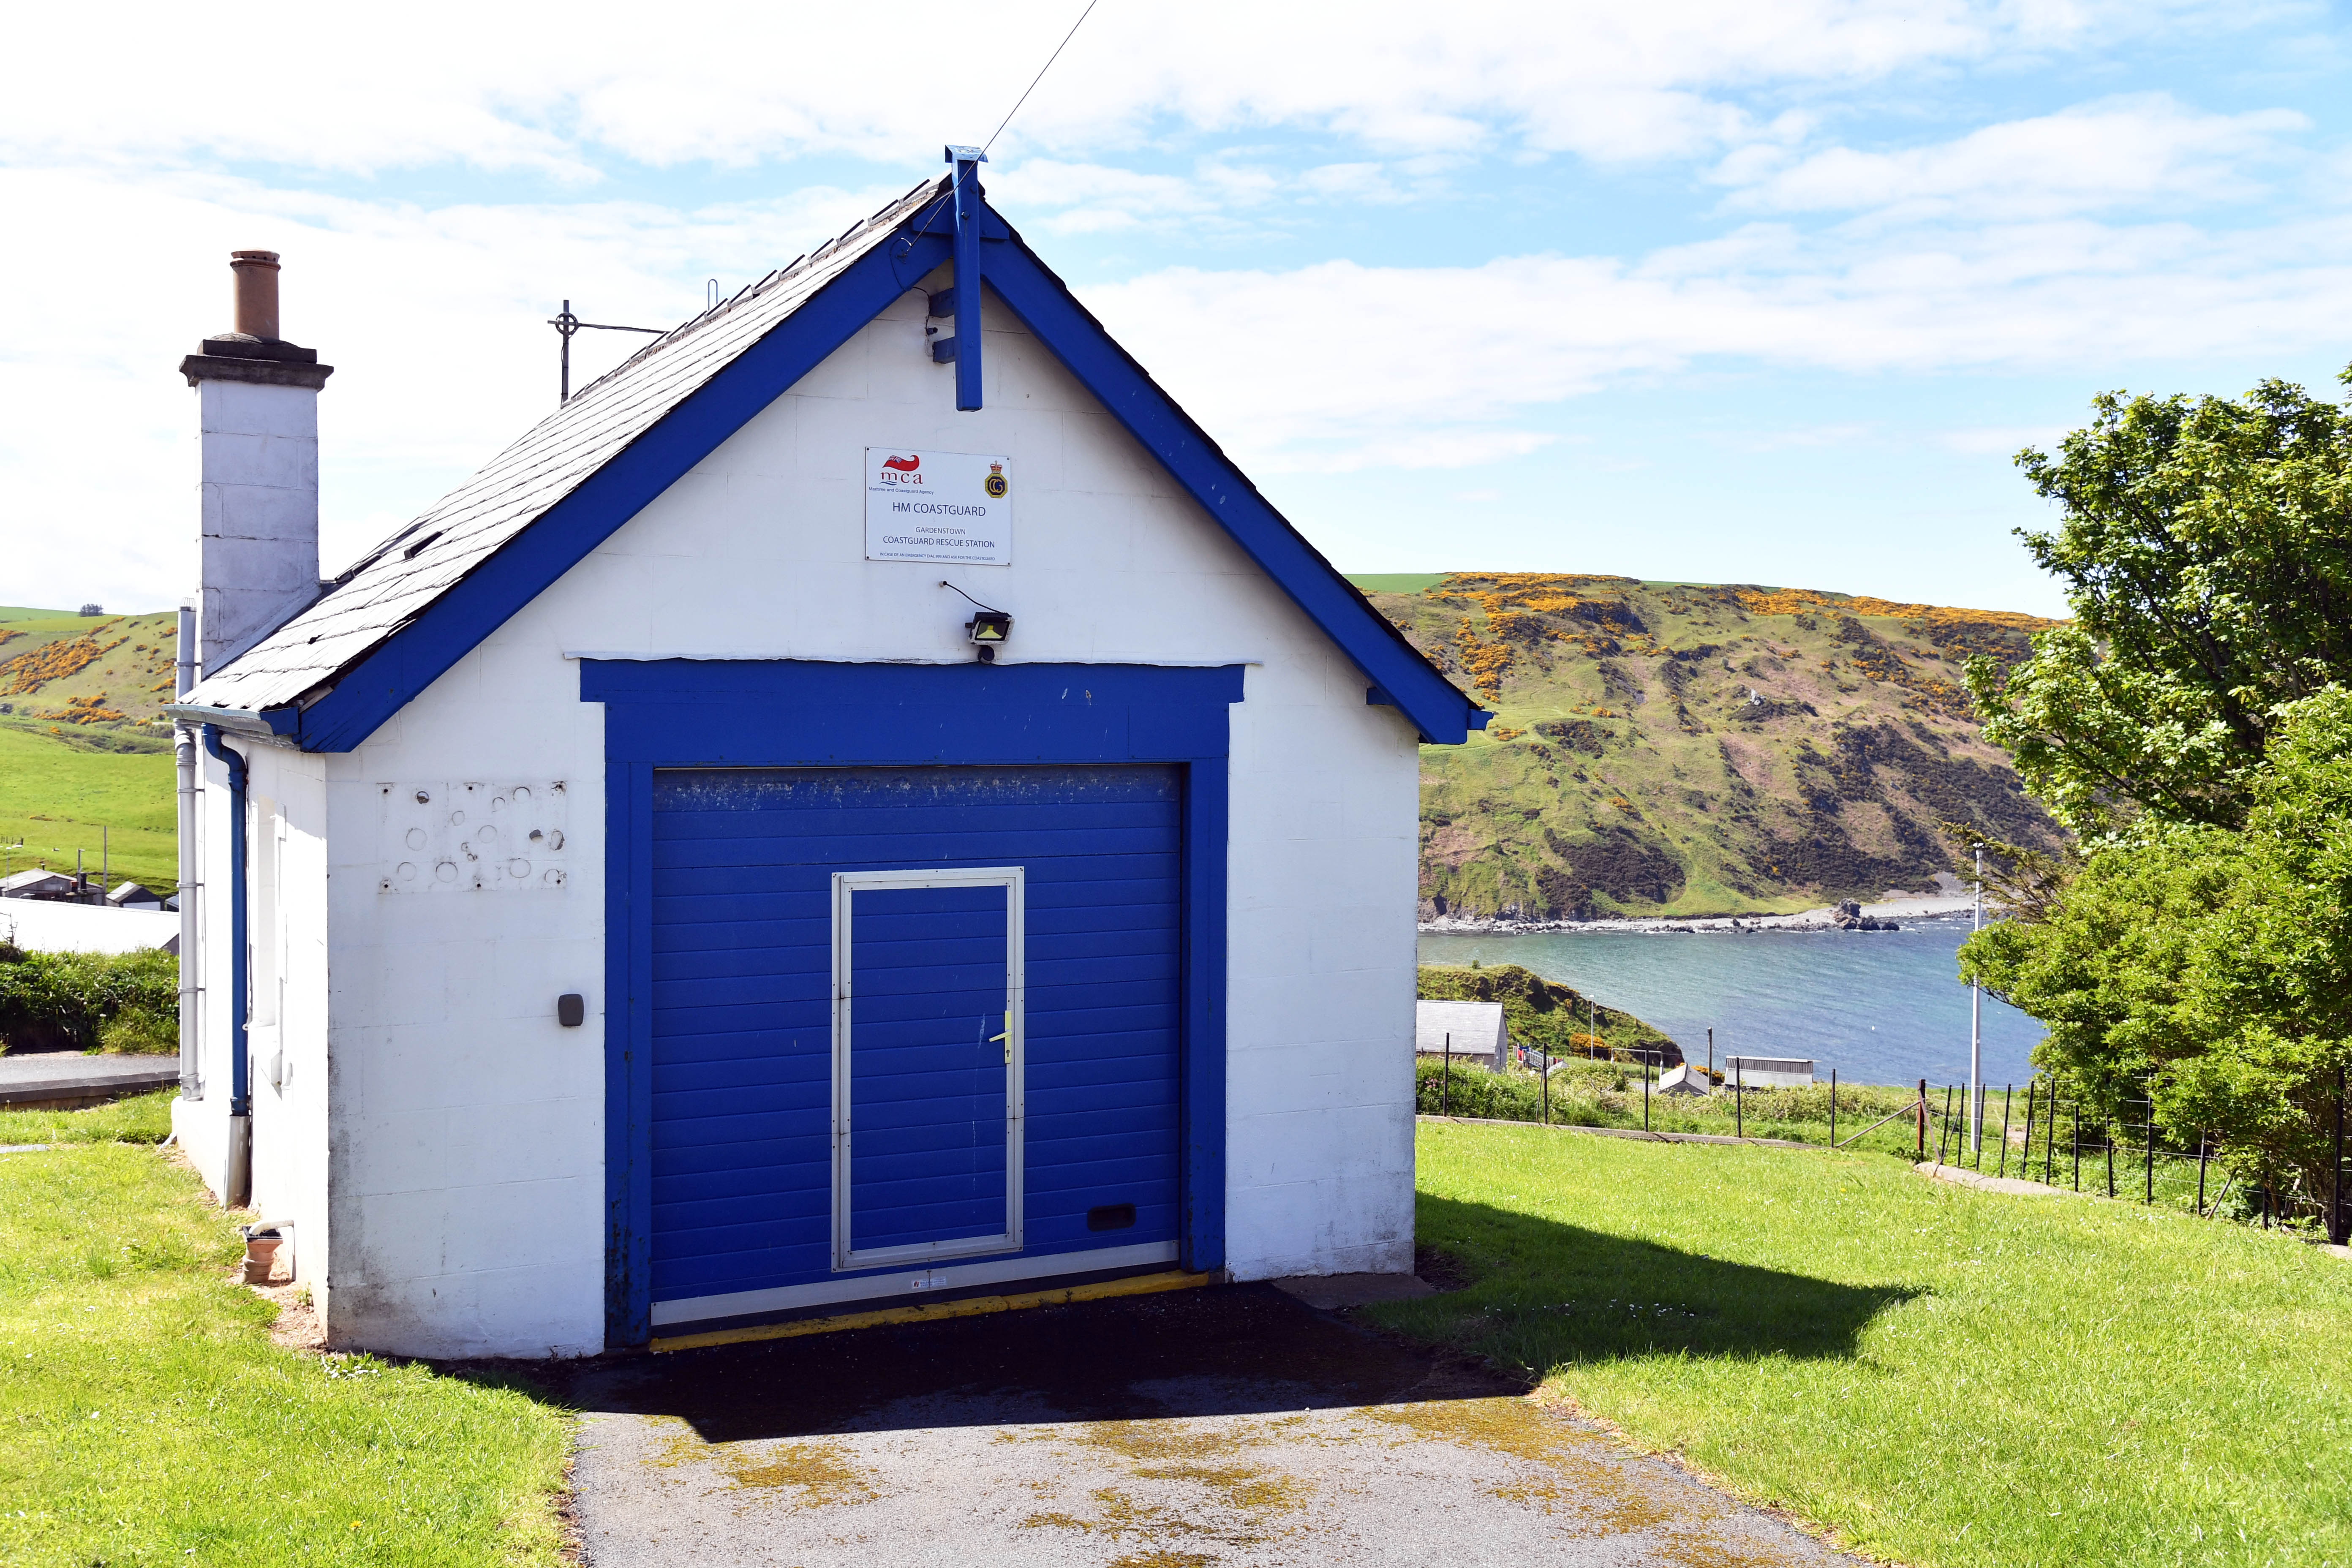 The former coastguard station at Gardenstown has been successfully sold at auction